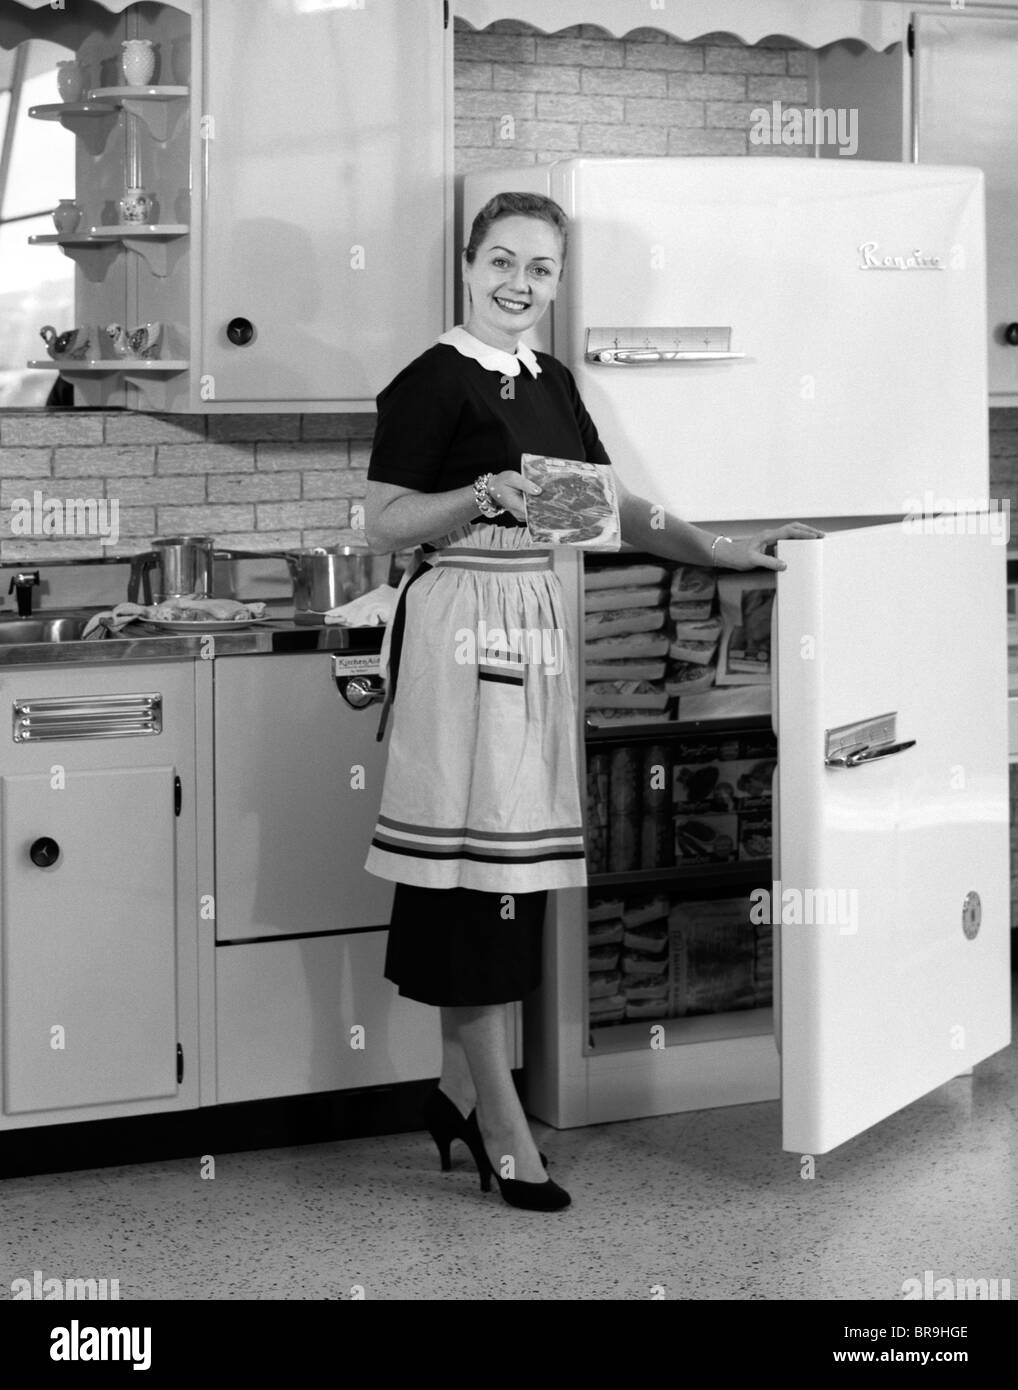 1950s SMILING WOMAN HOUSEWIFE IN KITCHEN TAKING FROZEN FOOD OUT OF REFRIGERATOR FREEZER Stock Photo